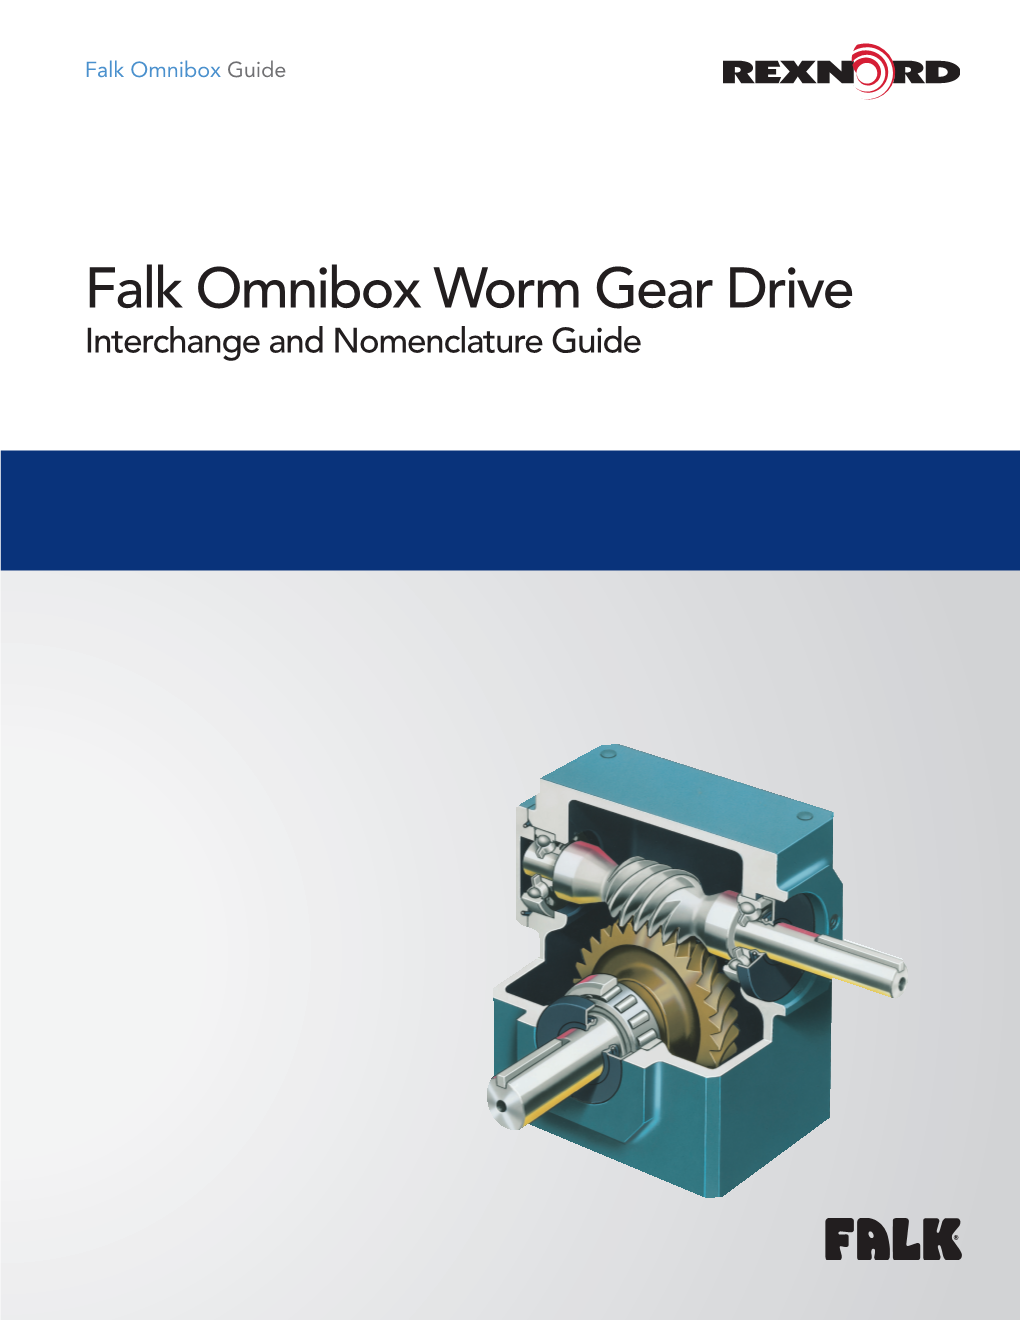 Falk Omnibox Worm Gear Drive Interchange and Nomenclature Guide FALK® OMNIBOX the High-Performance Choice for All Your Applications